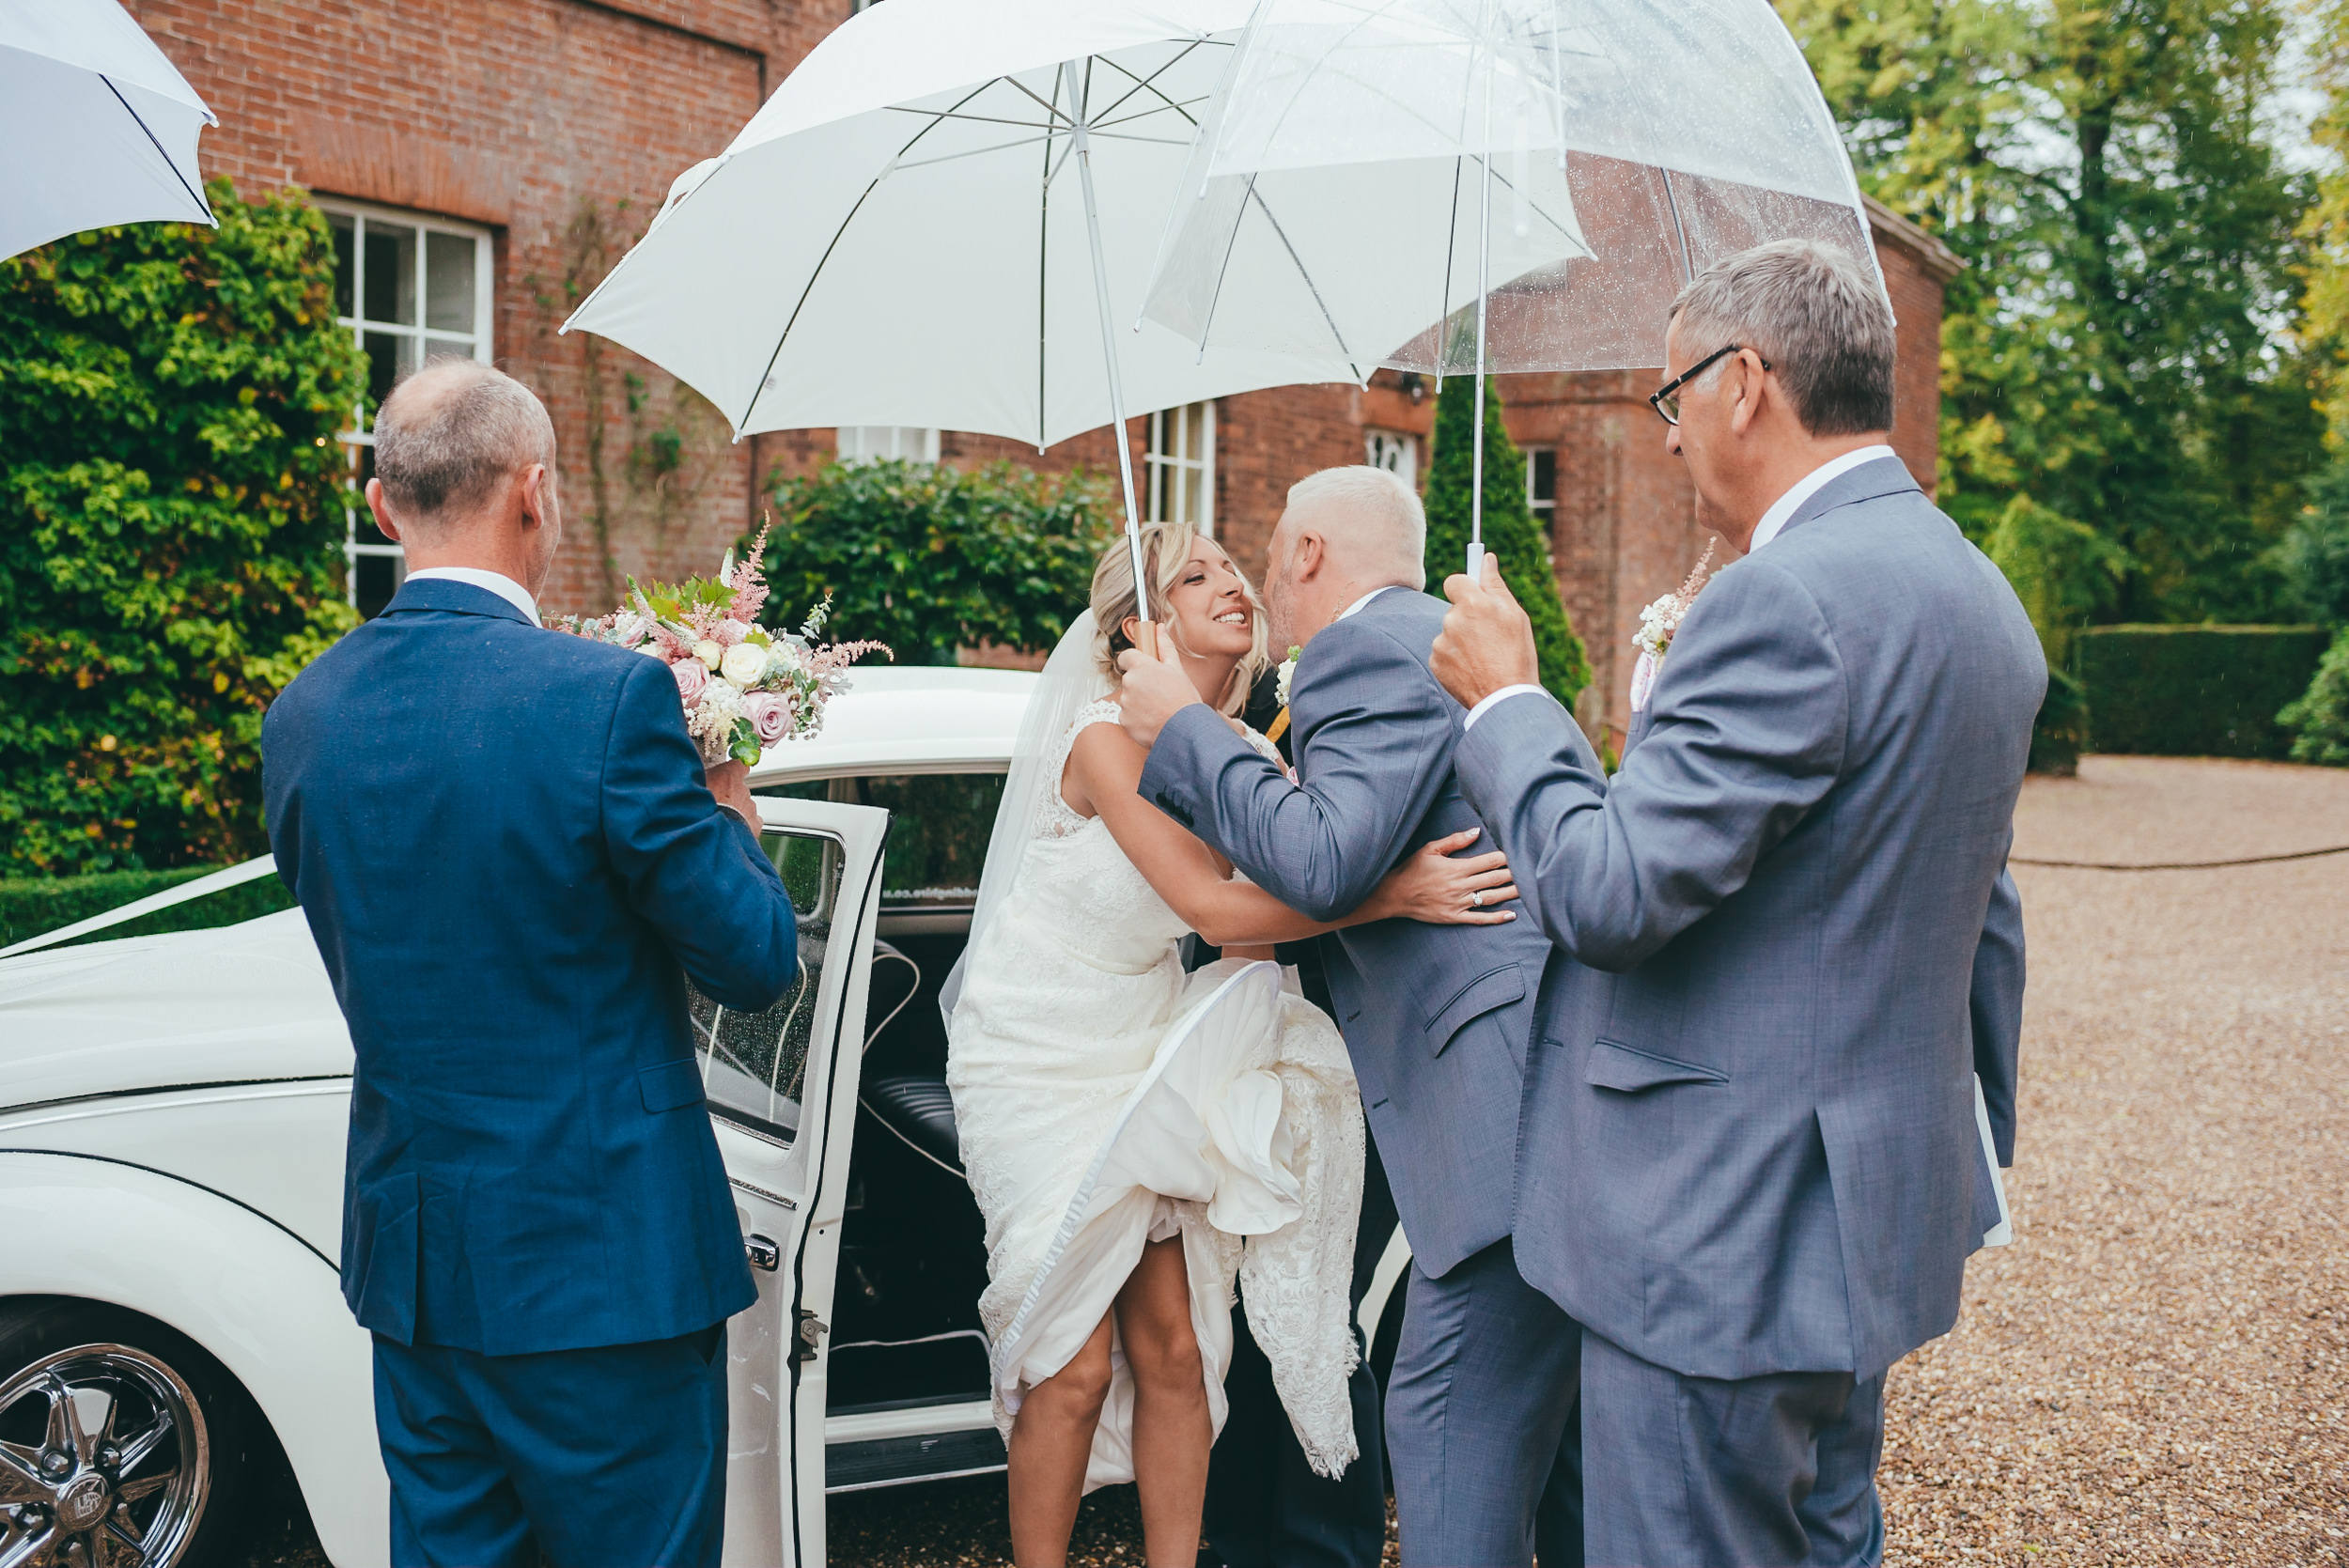 Keeping the bride dry under an umbrella